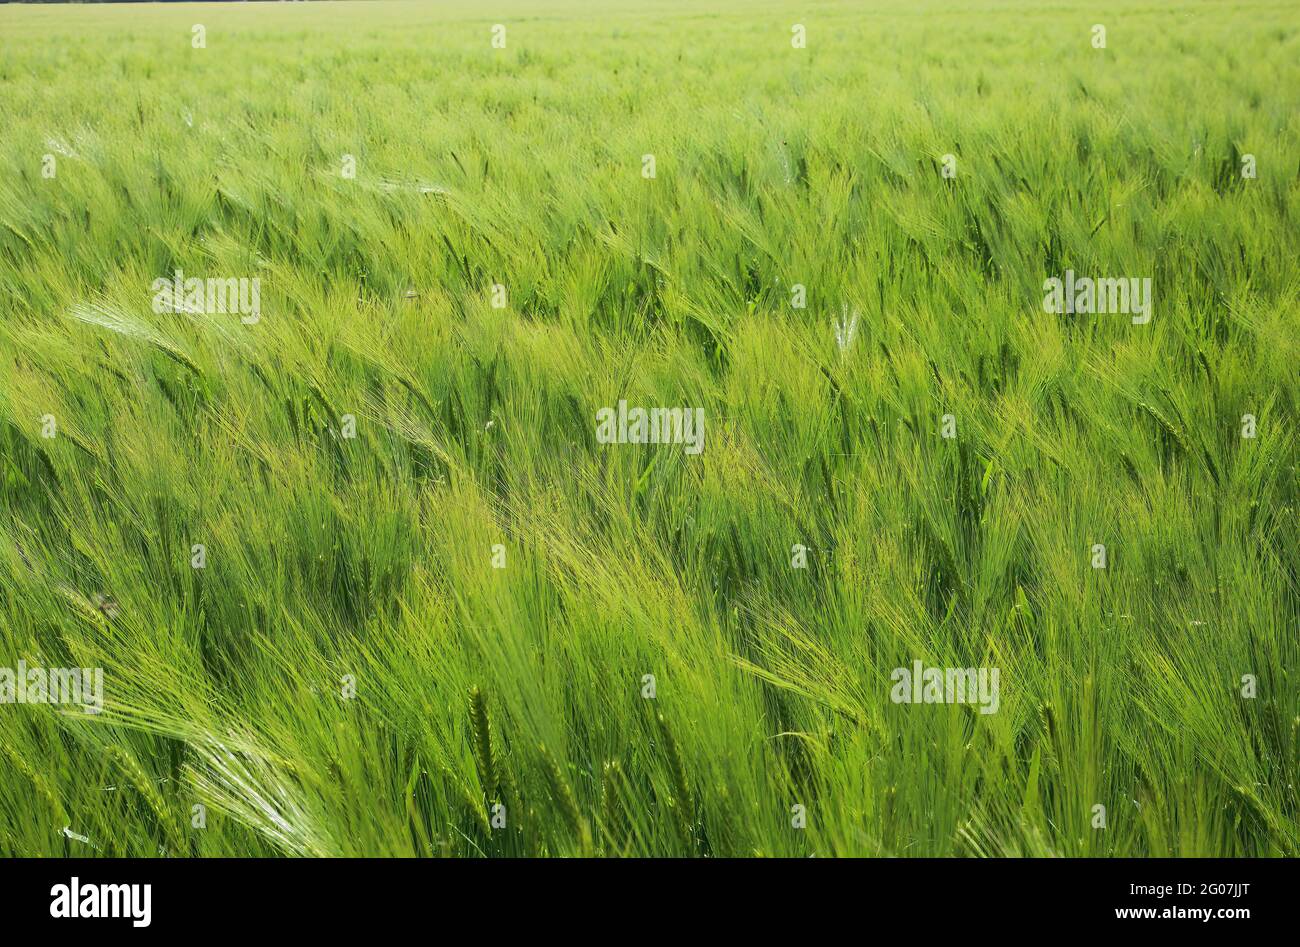 Full frame view on field with young green common wheat (triticum aestivum) Stock Photo